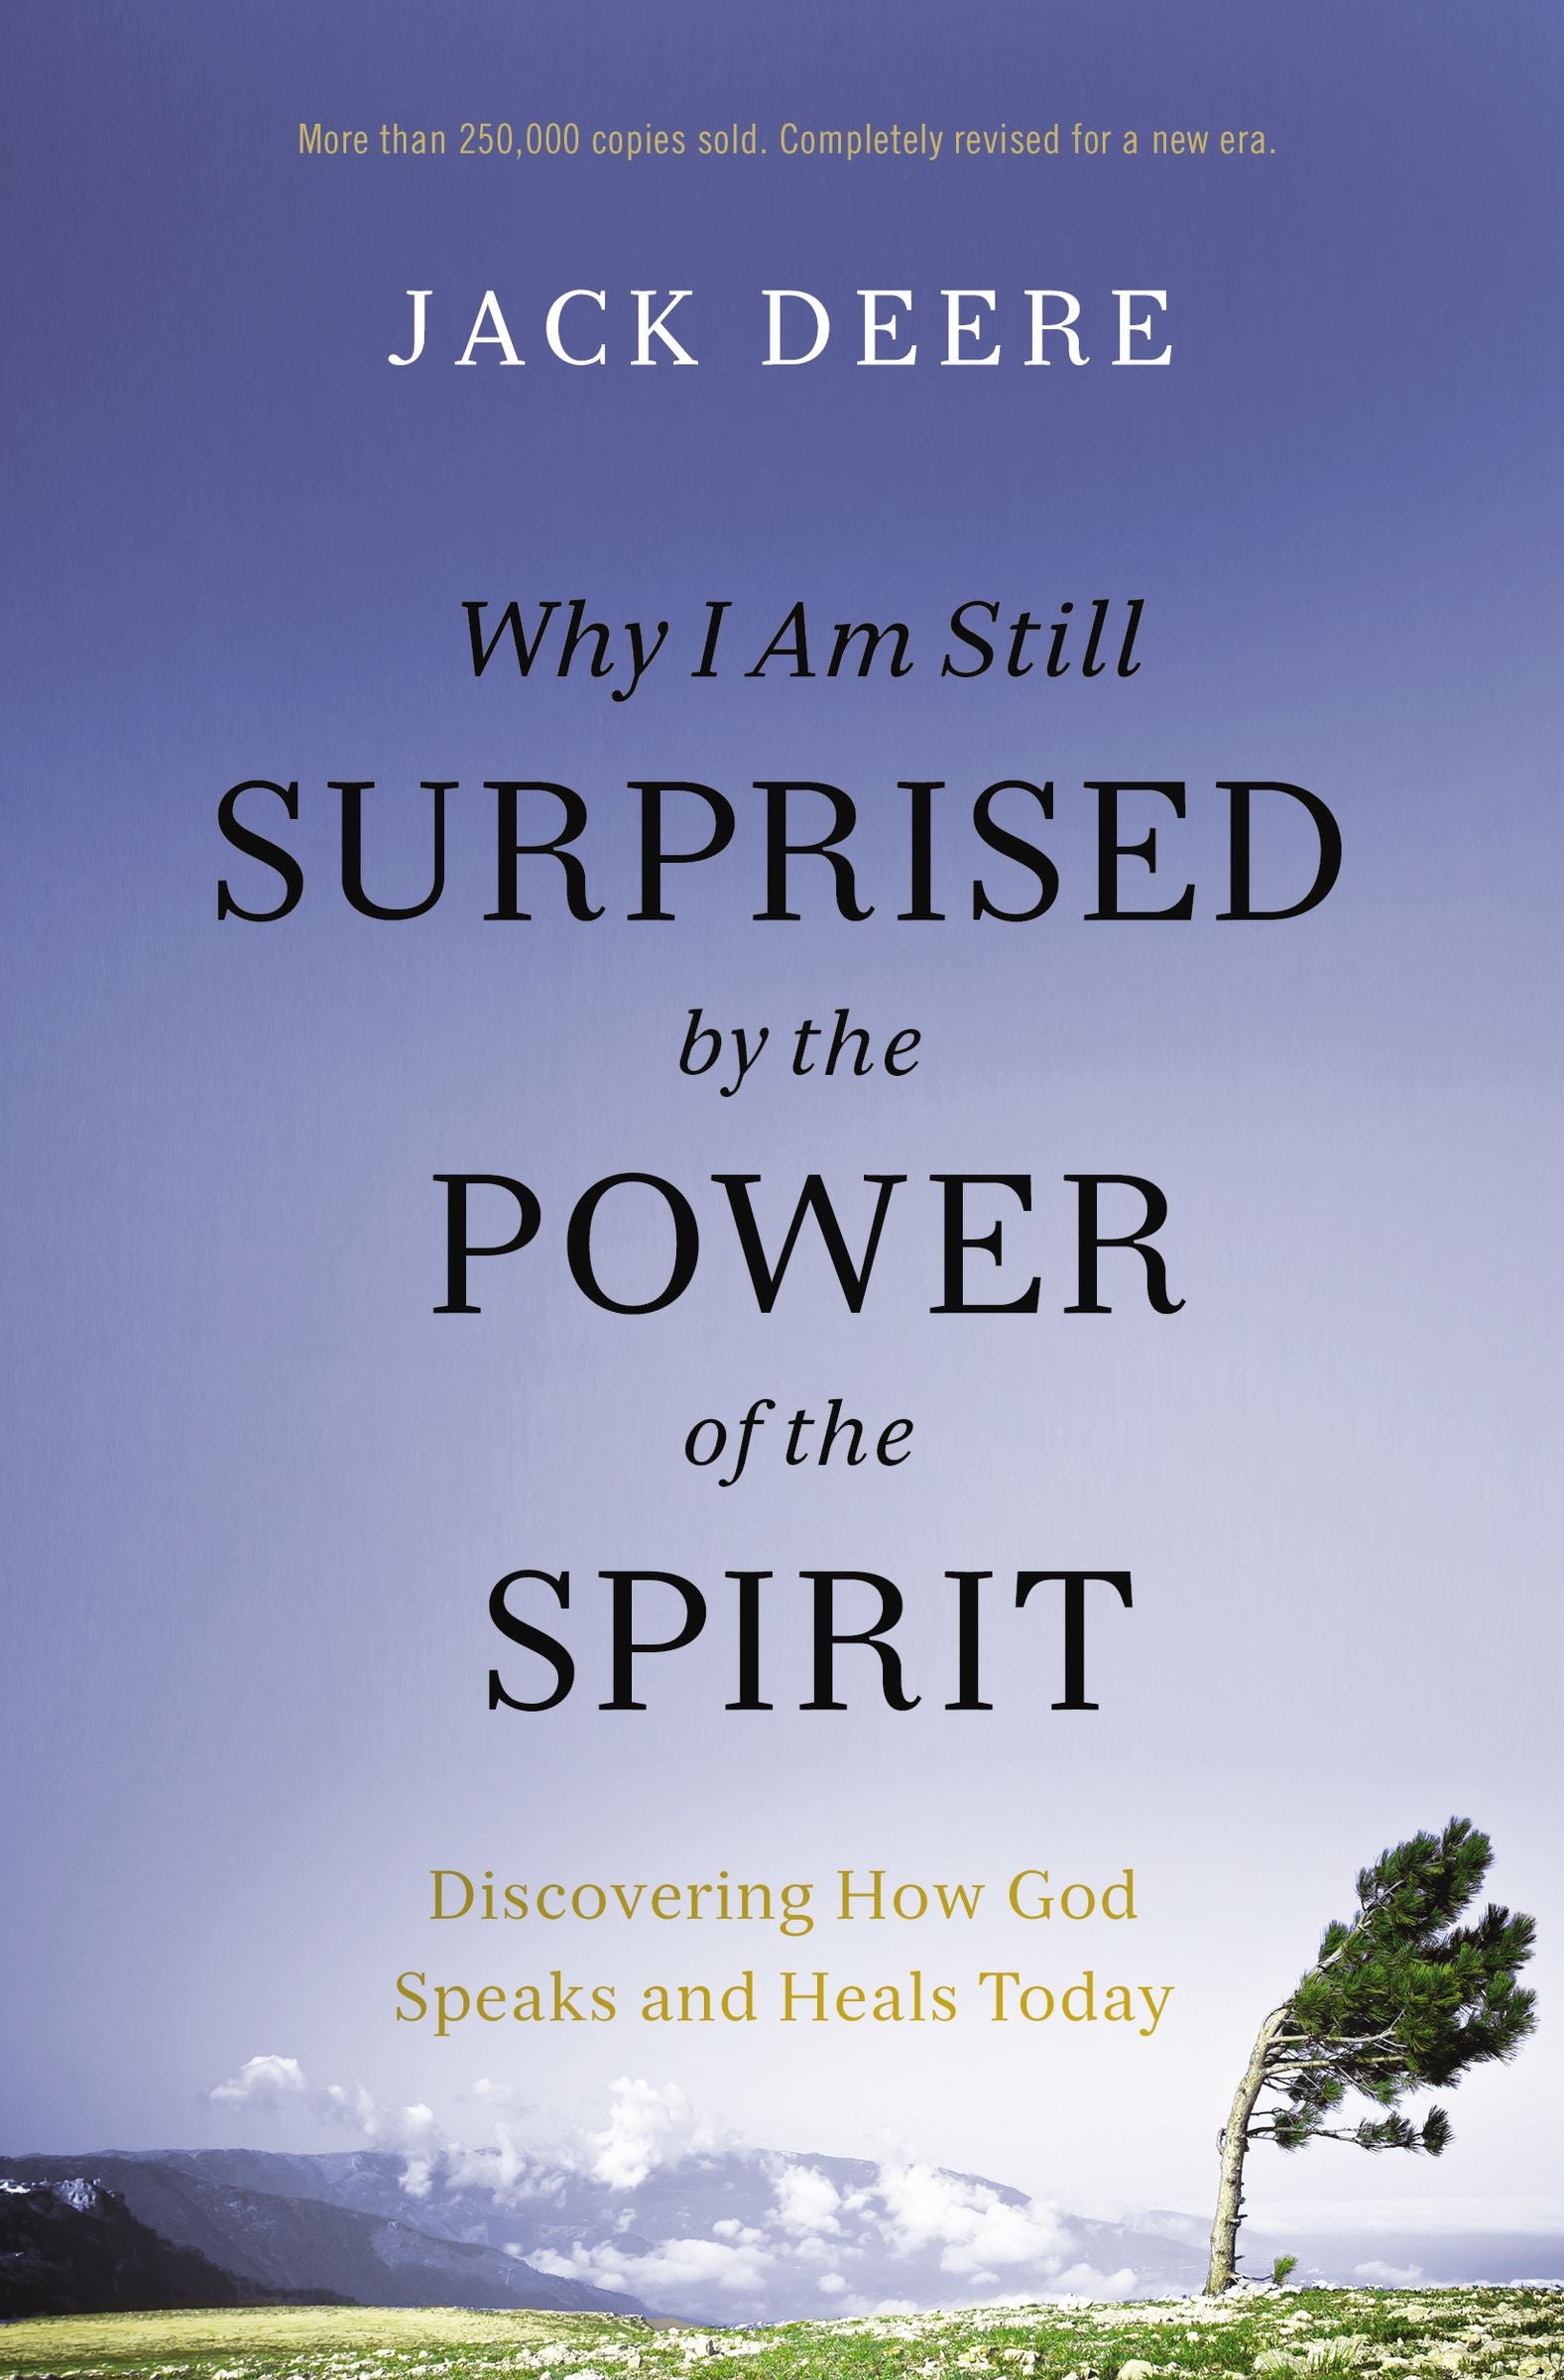 Image of Why I Am Still Surprised by the Power of the Spirit other